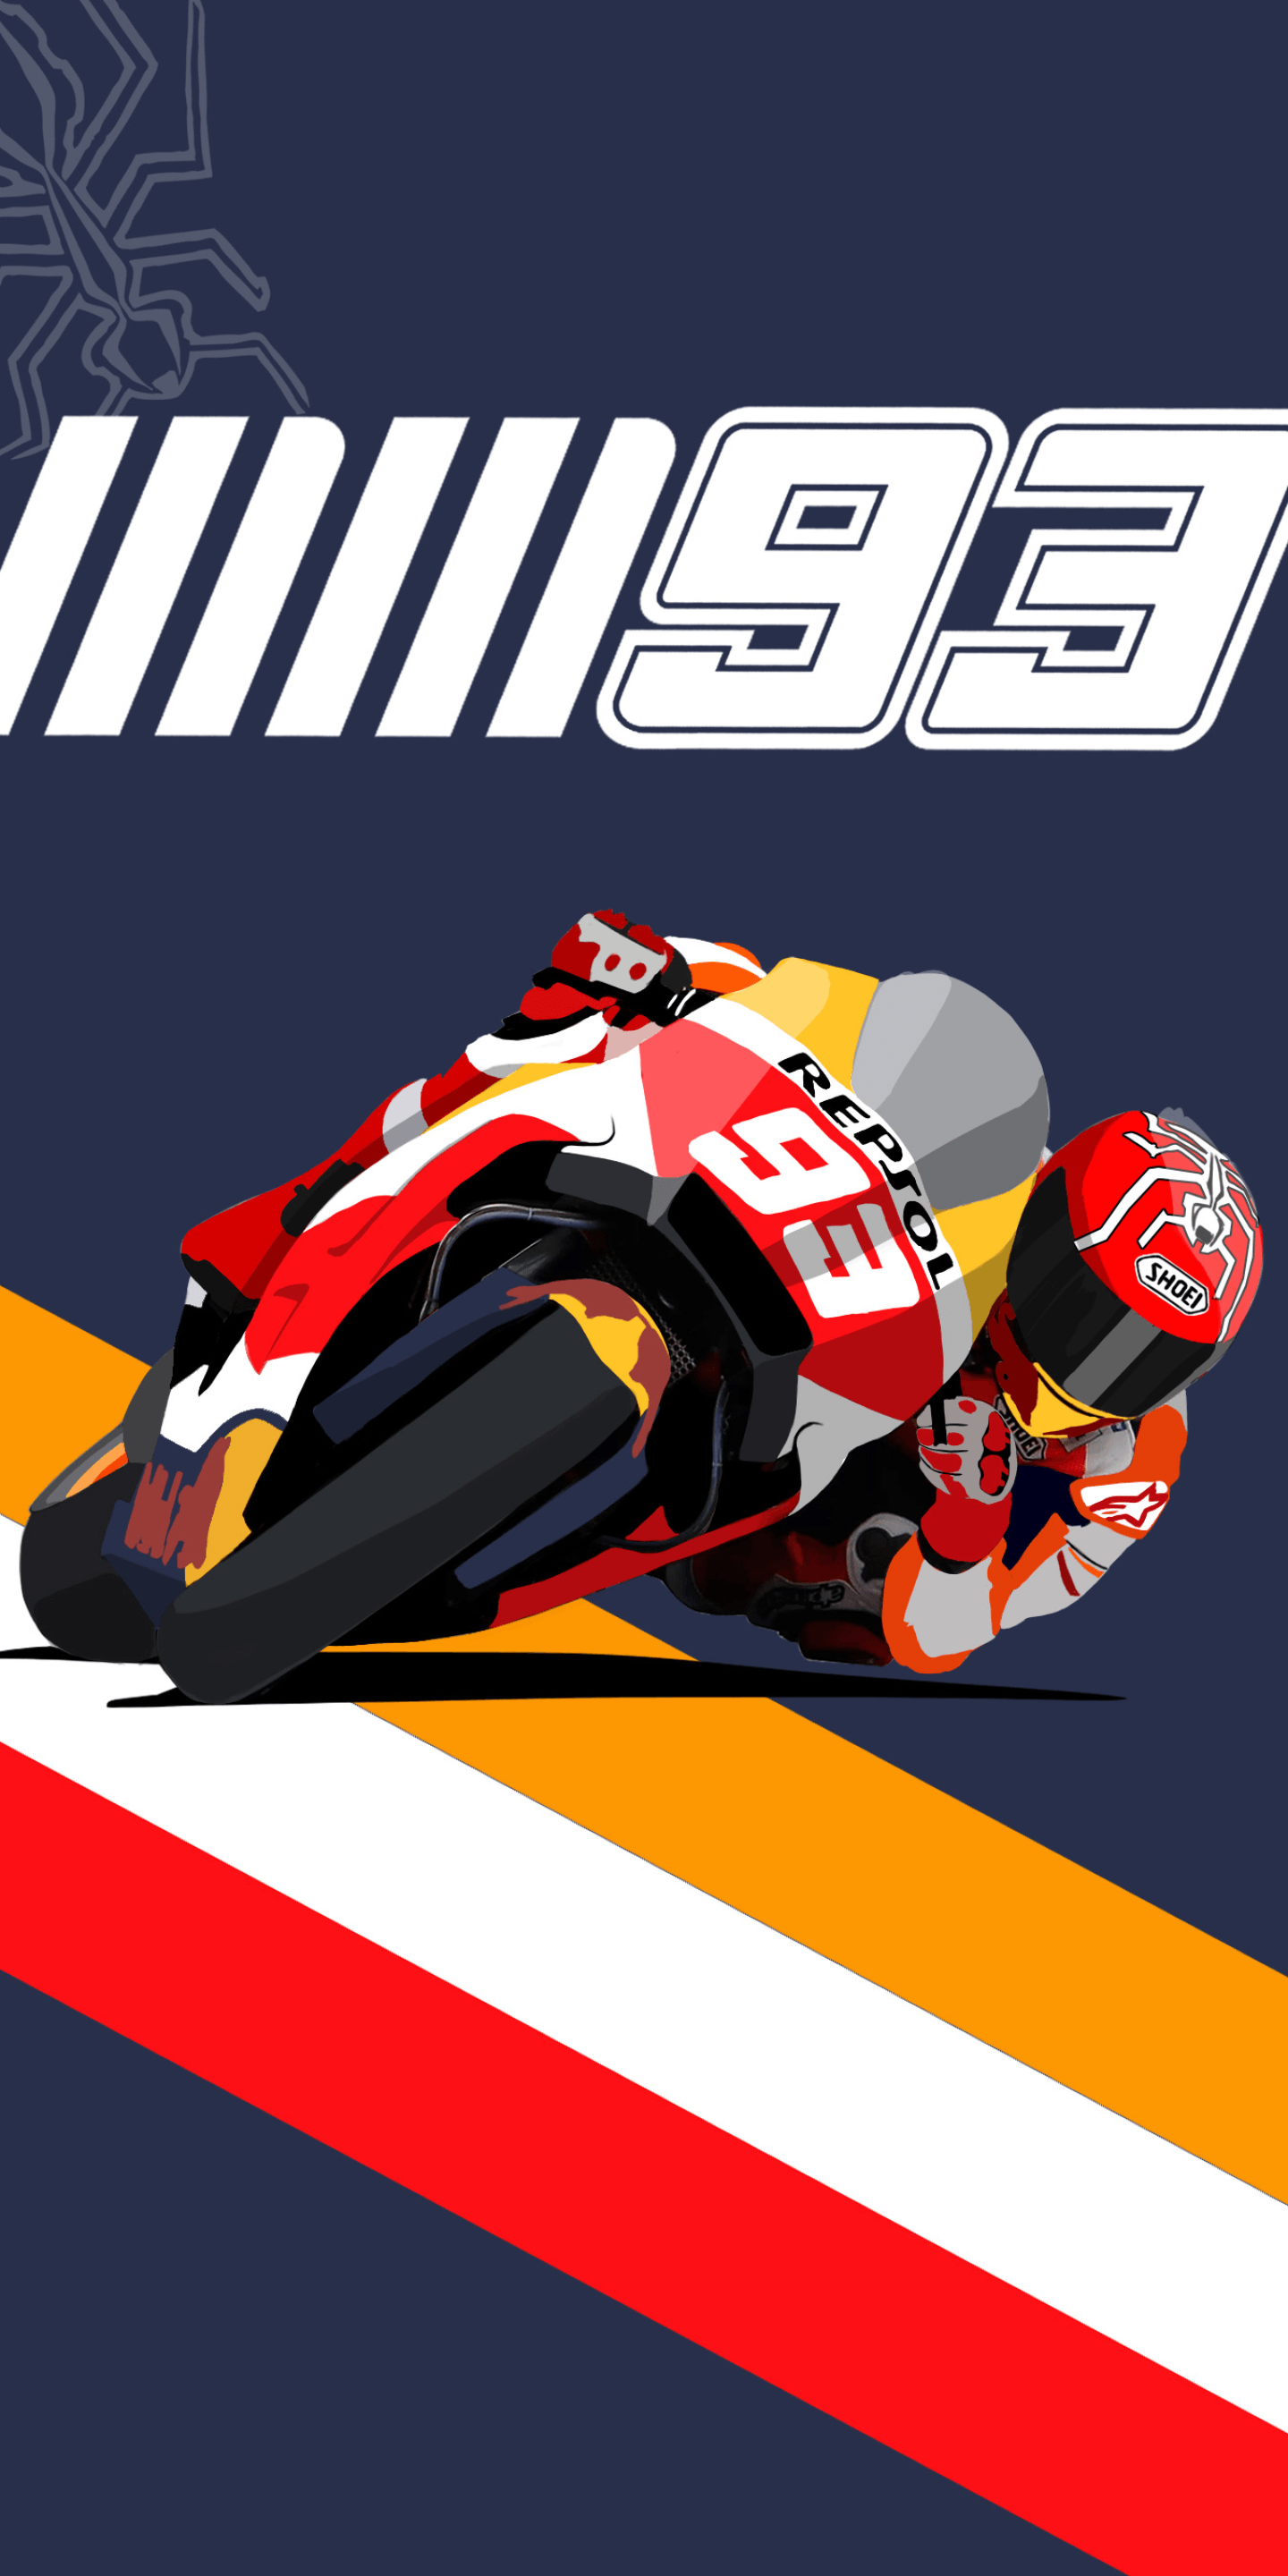 I did something today! MM93 wallpaper for all you Marquez fans out there.: motogp